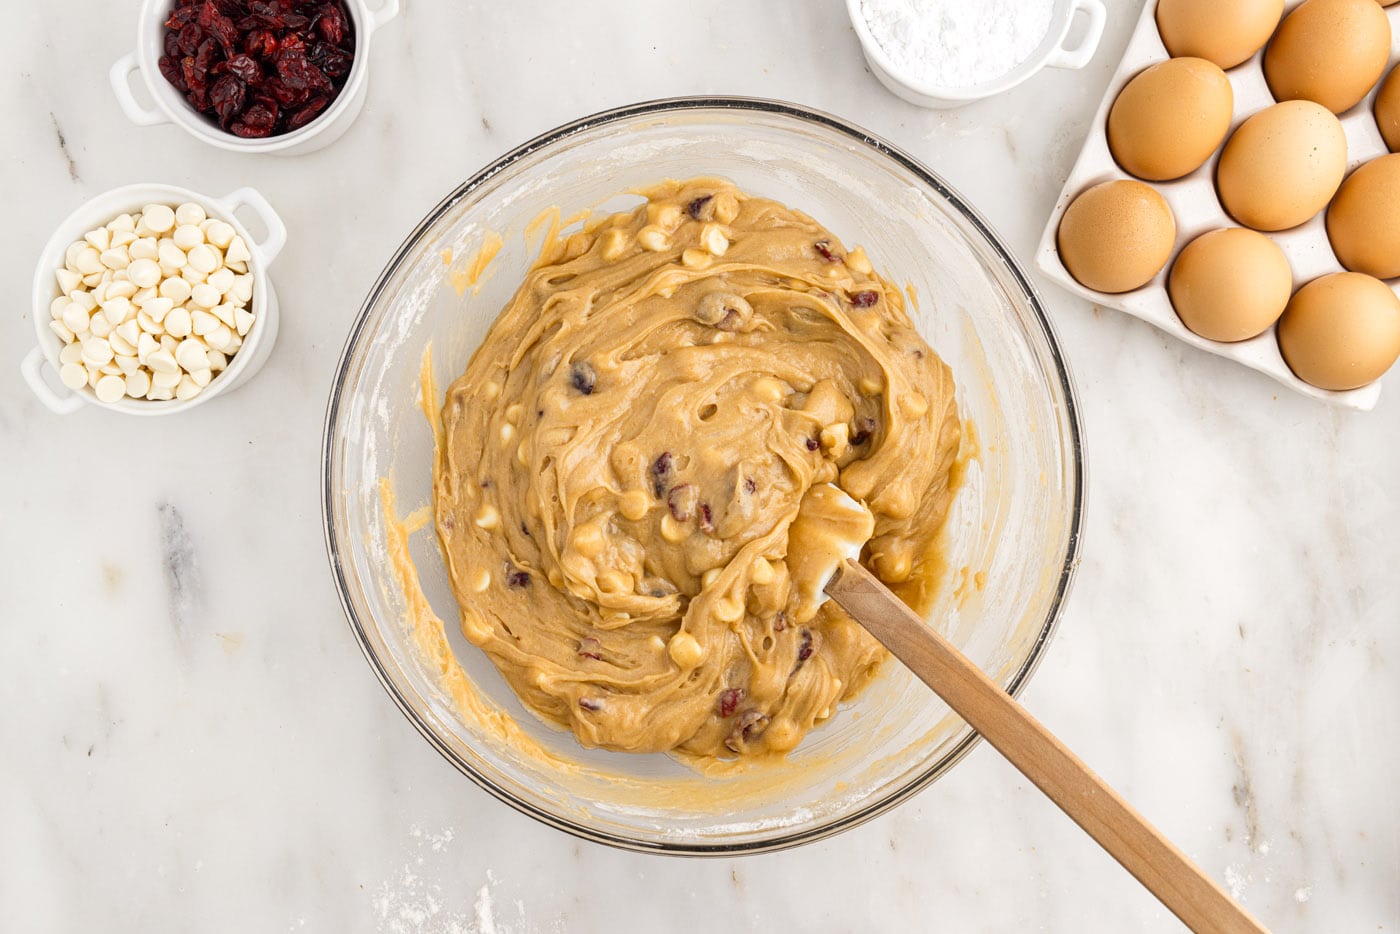 blondie dough with white chocolate chips and dried cranberries in a bowl